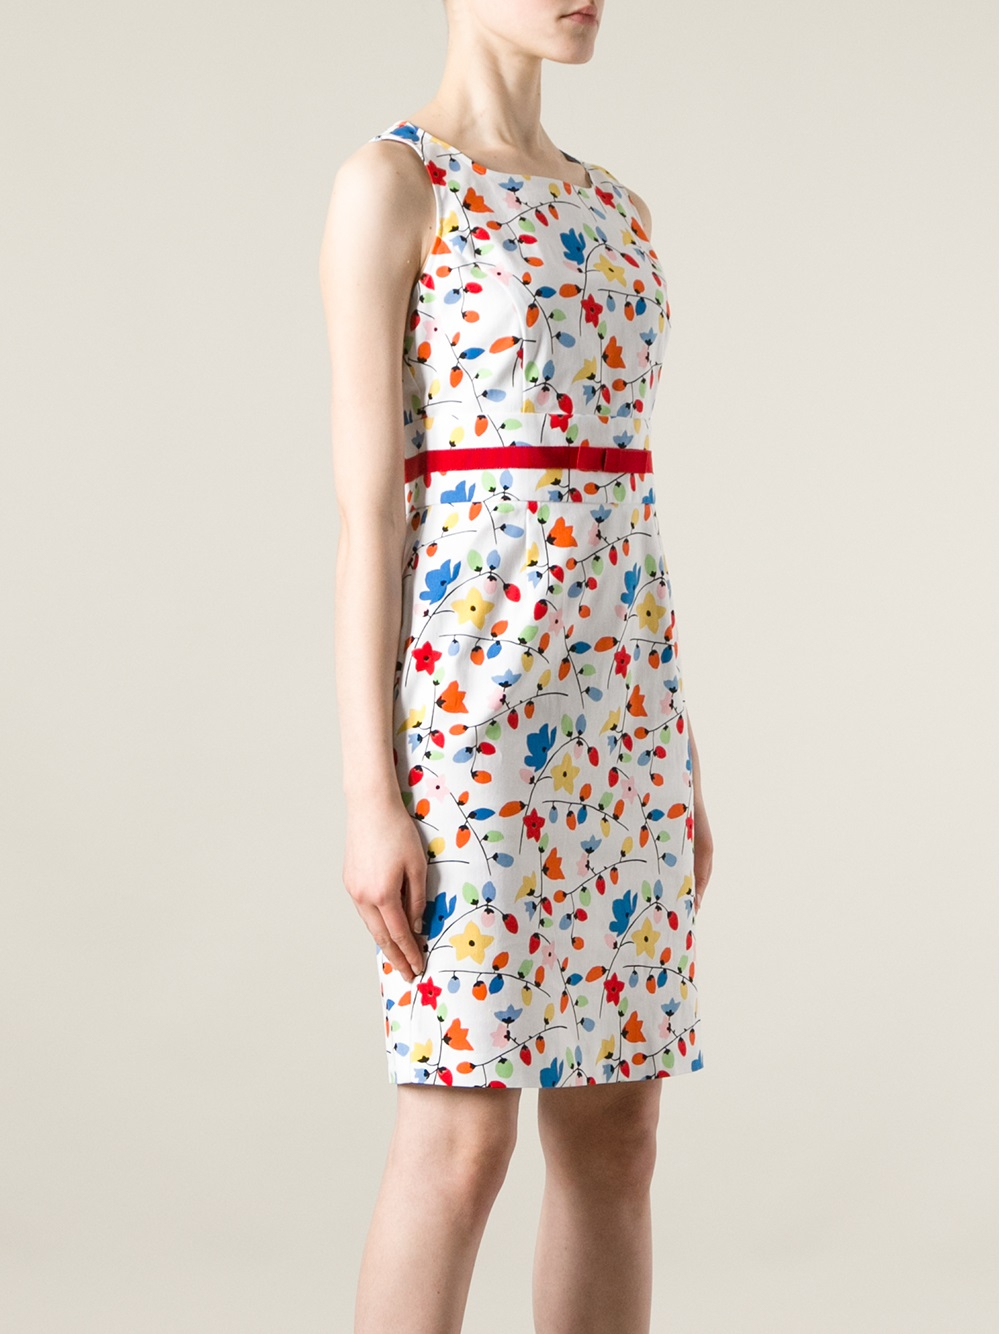 Lyst - Love Moschino Floral Printed Dress in White